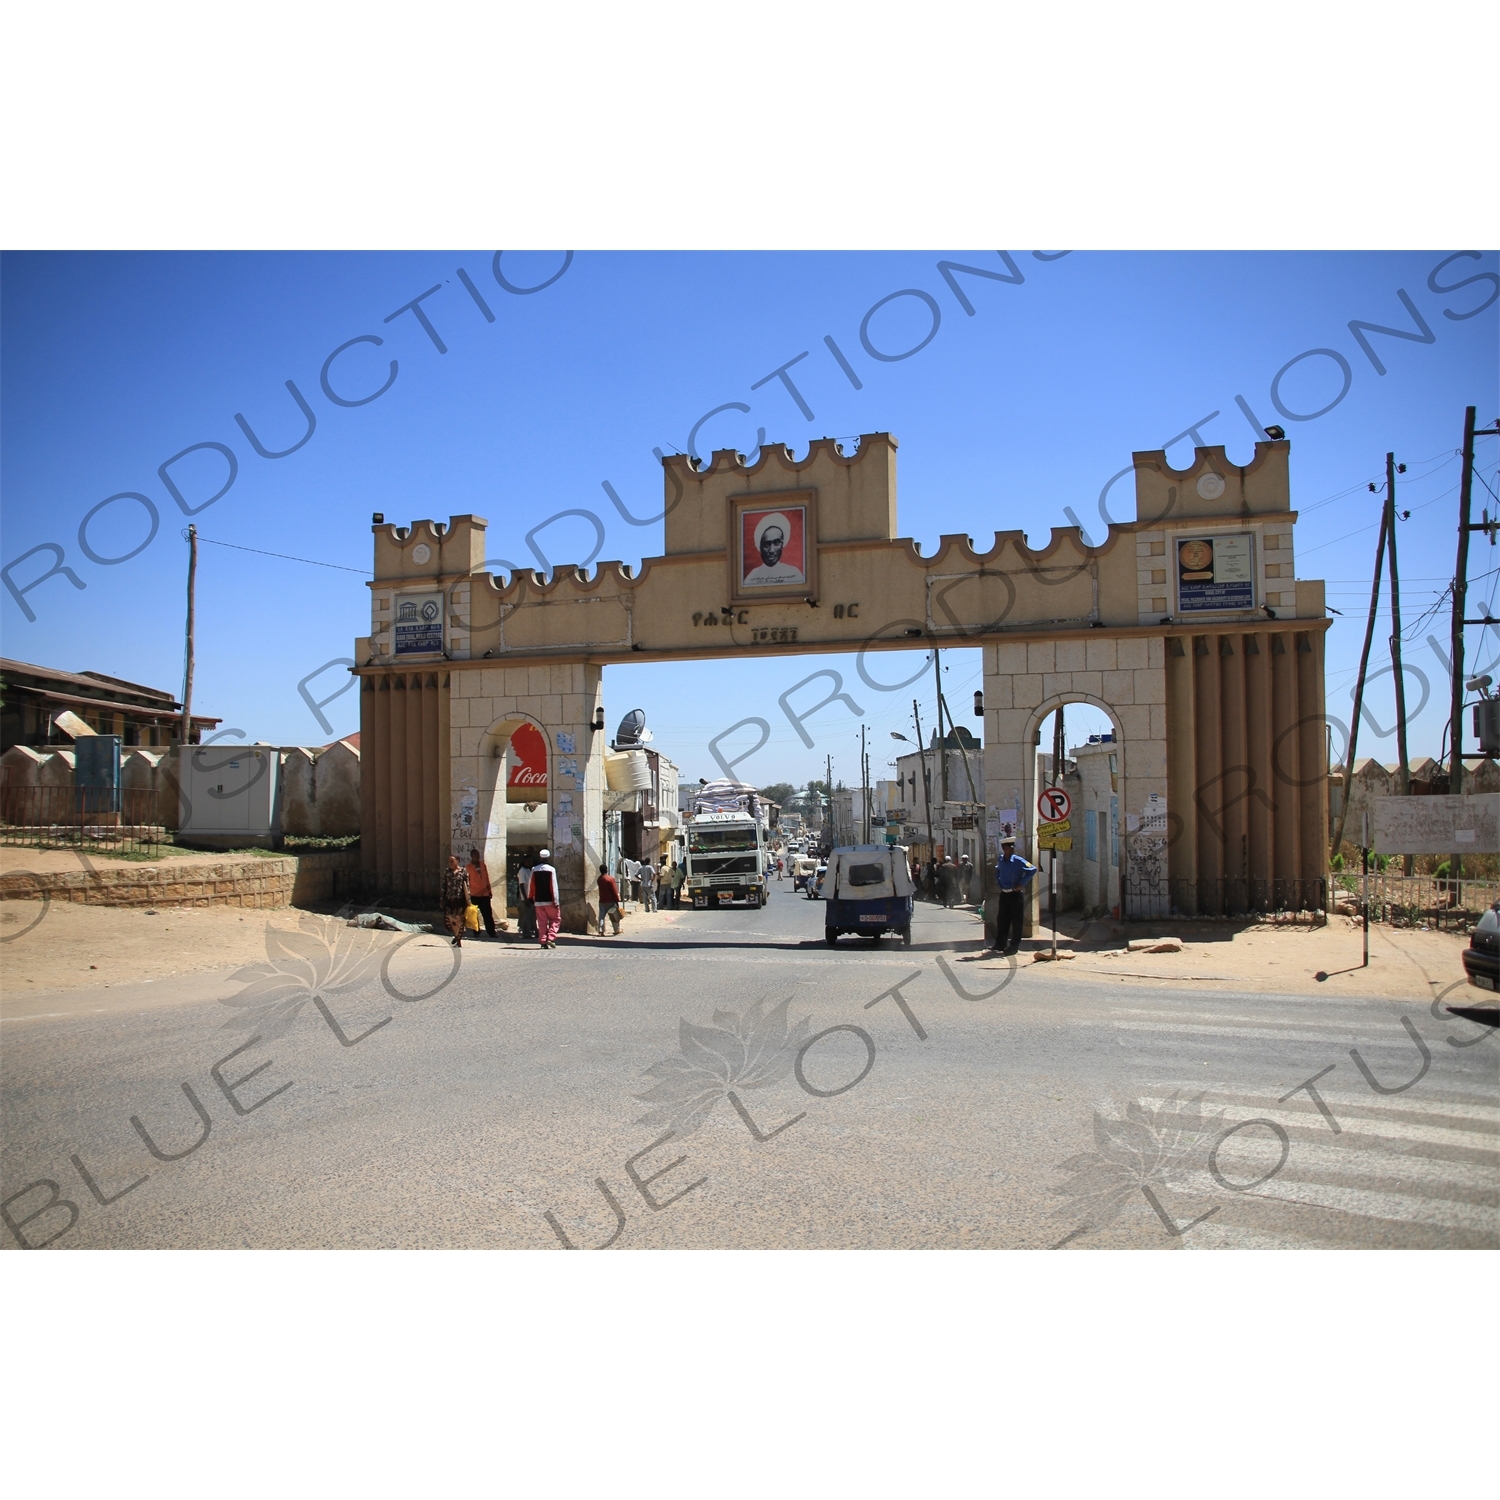 Gate to the Old City of Harar